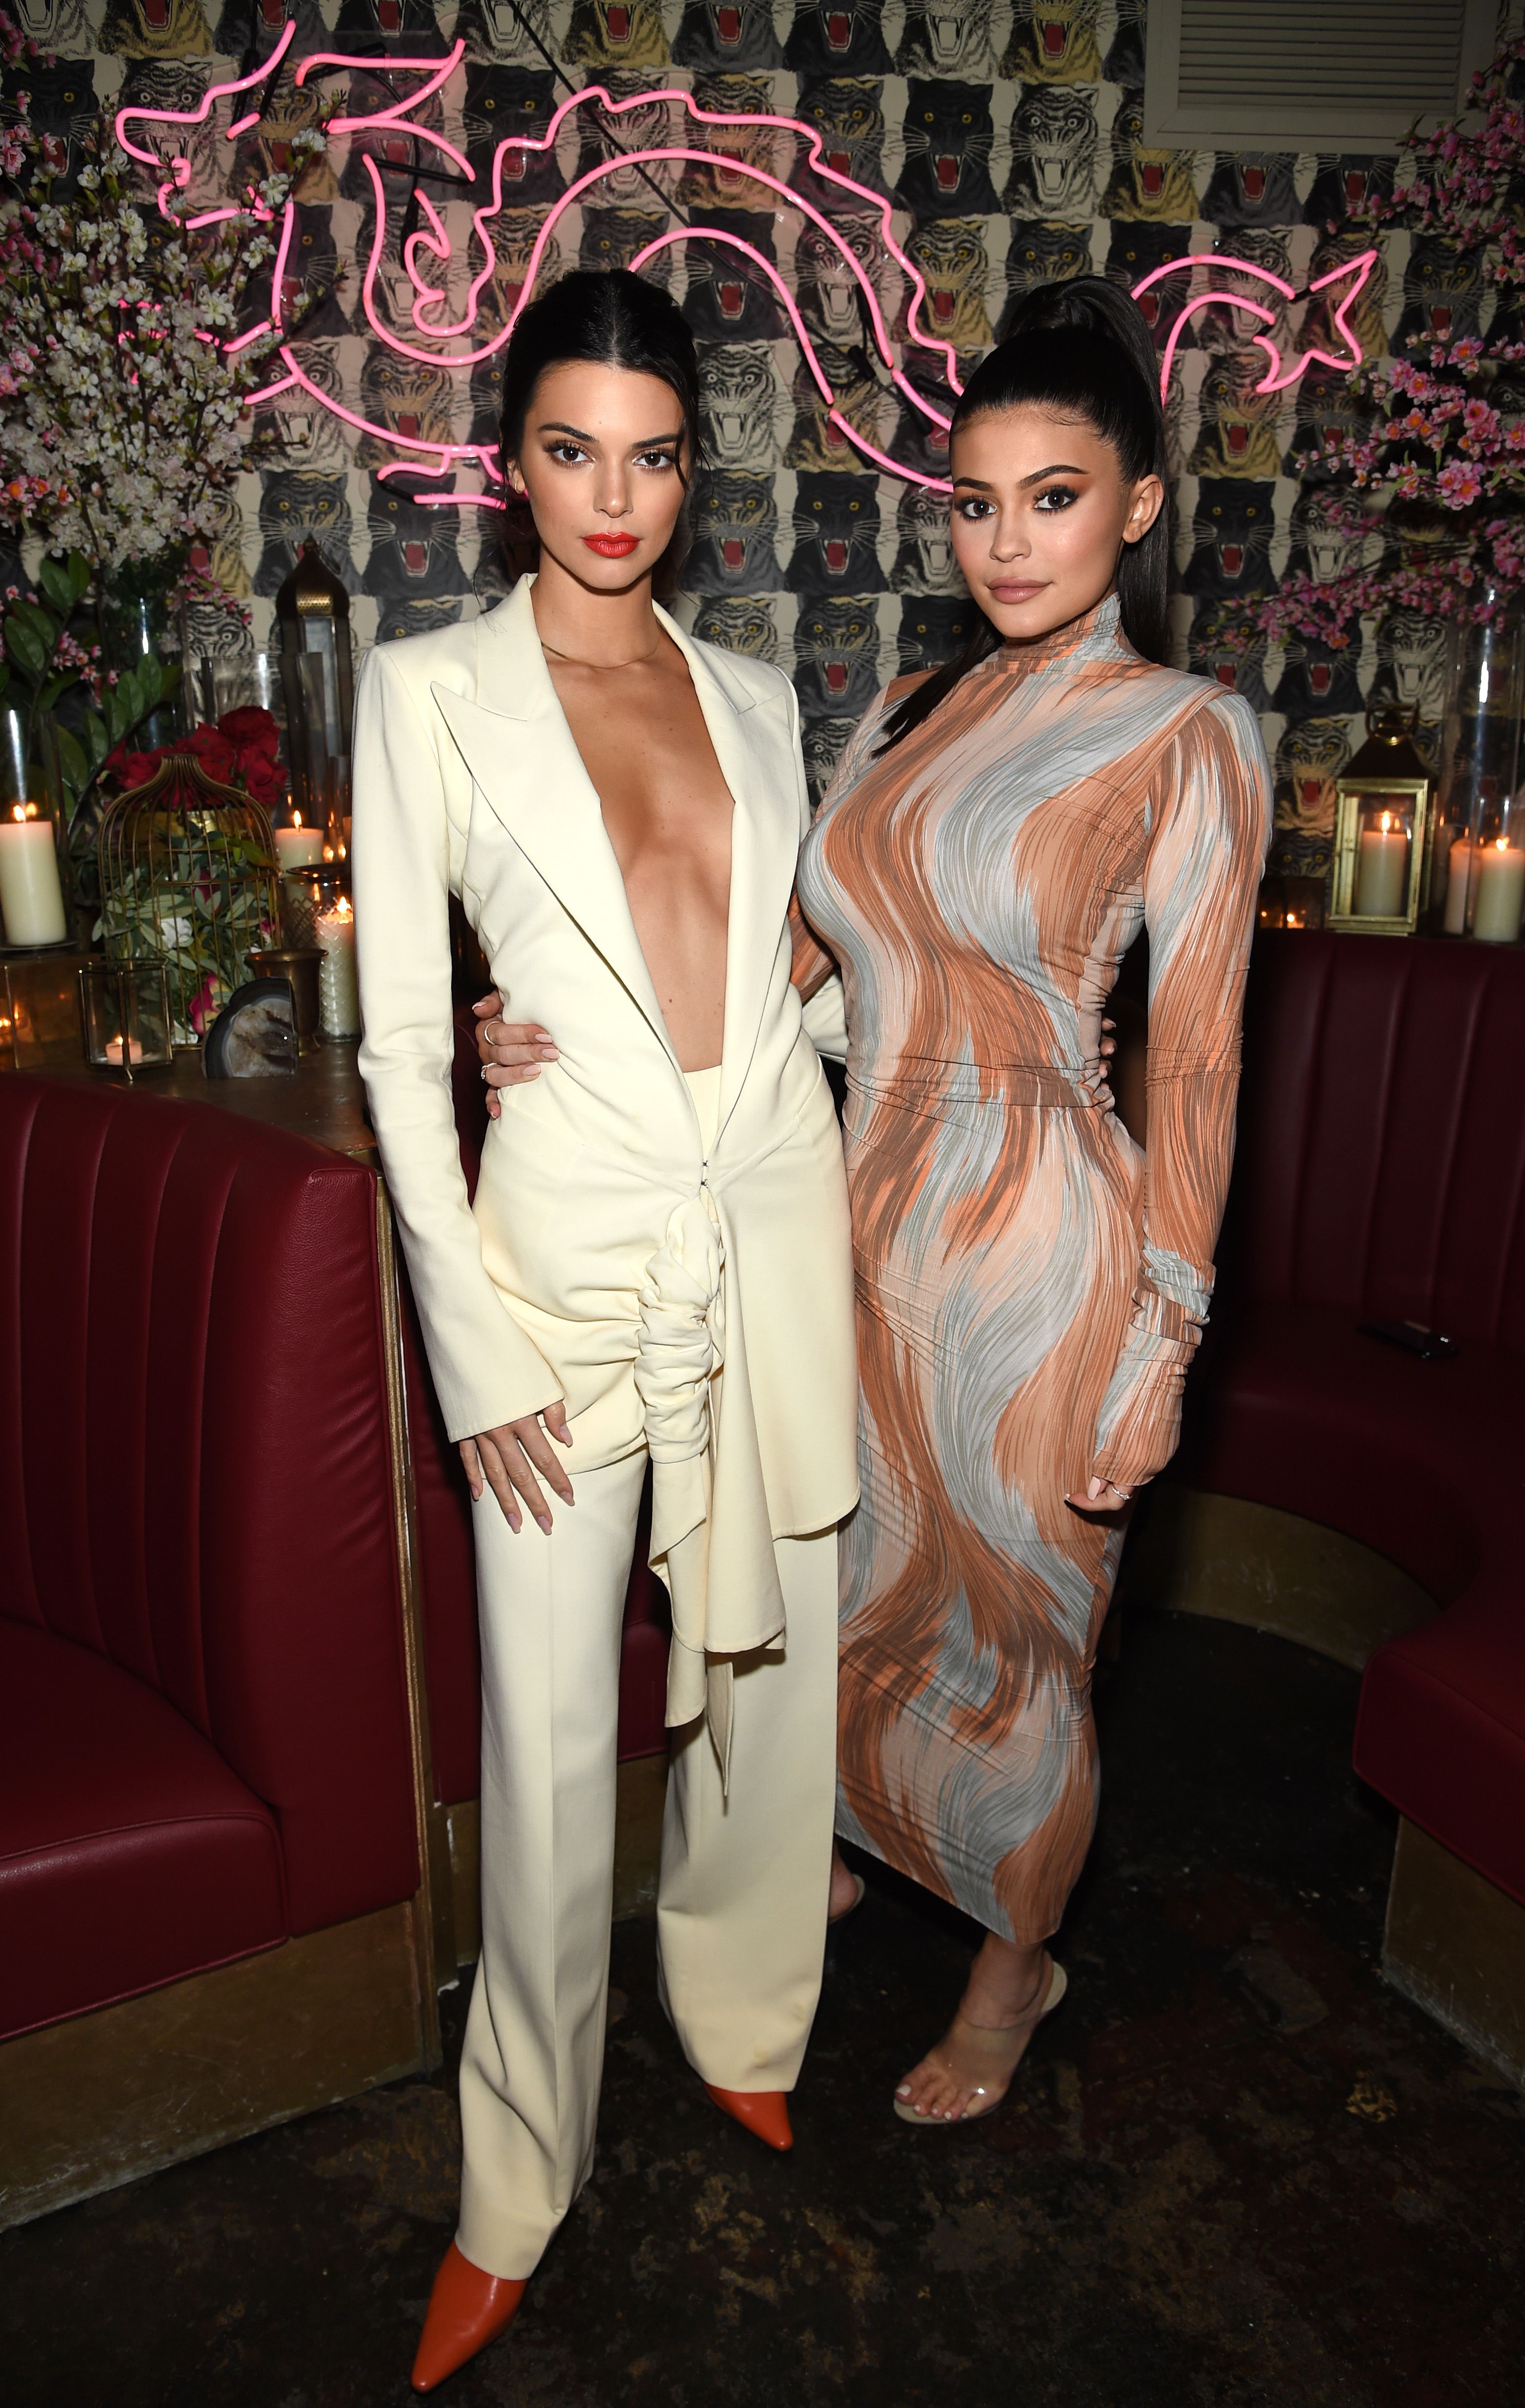 https://hips.hearstapps.com/hmg-prod/images/model-kendall-jenner-and-founder-kylie-cosmetics-kylie-news-photo-956246056-1554053279.jpg